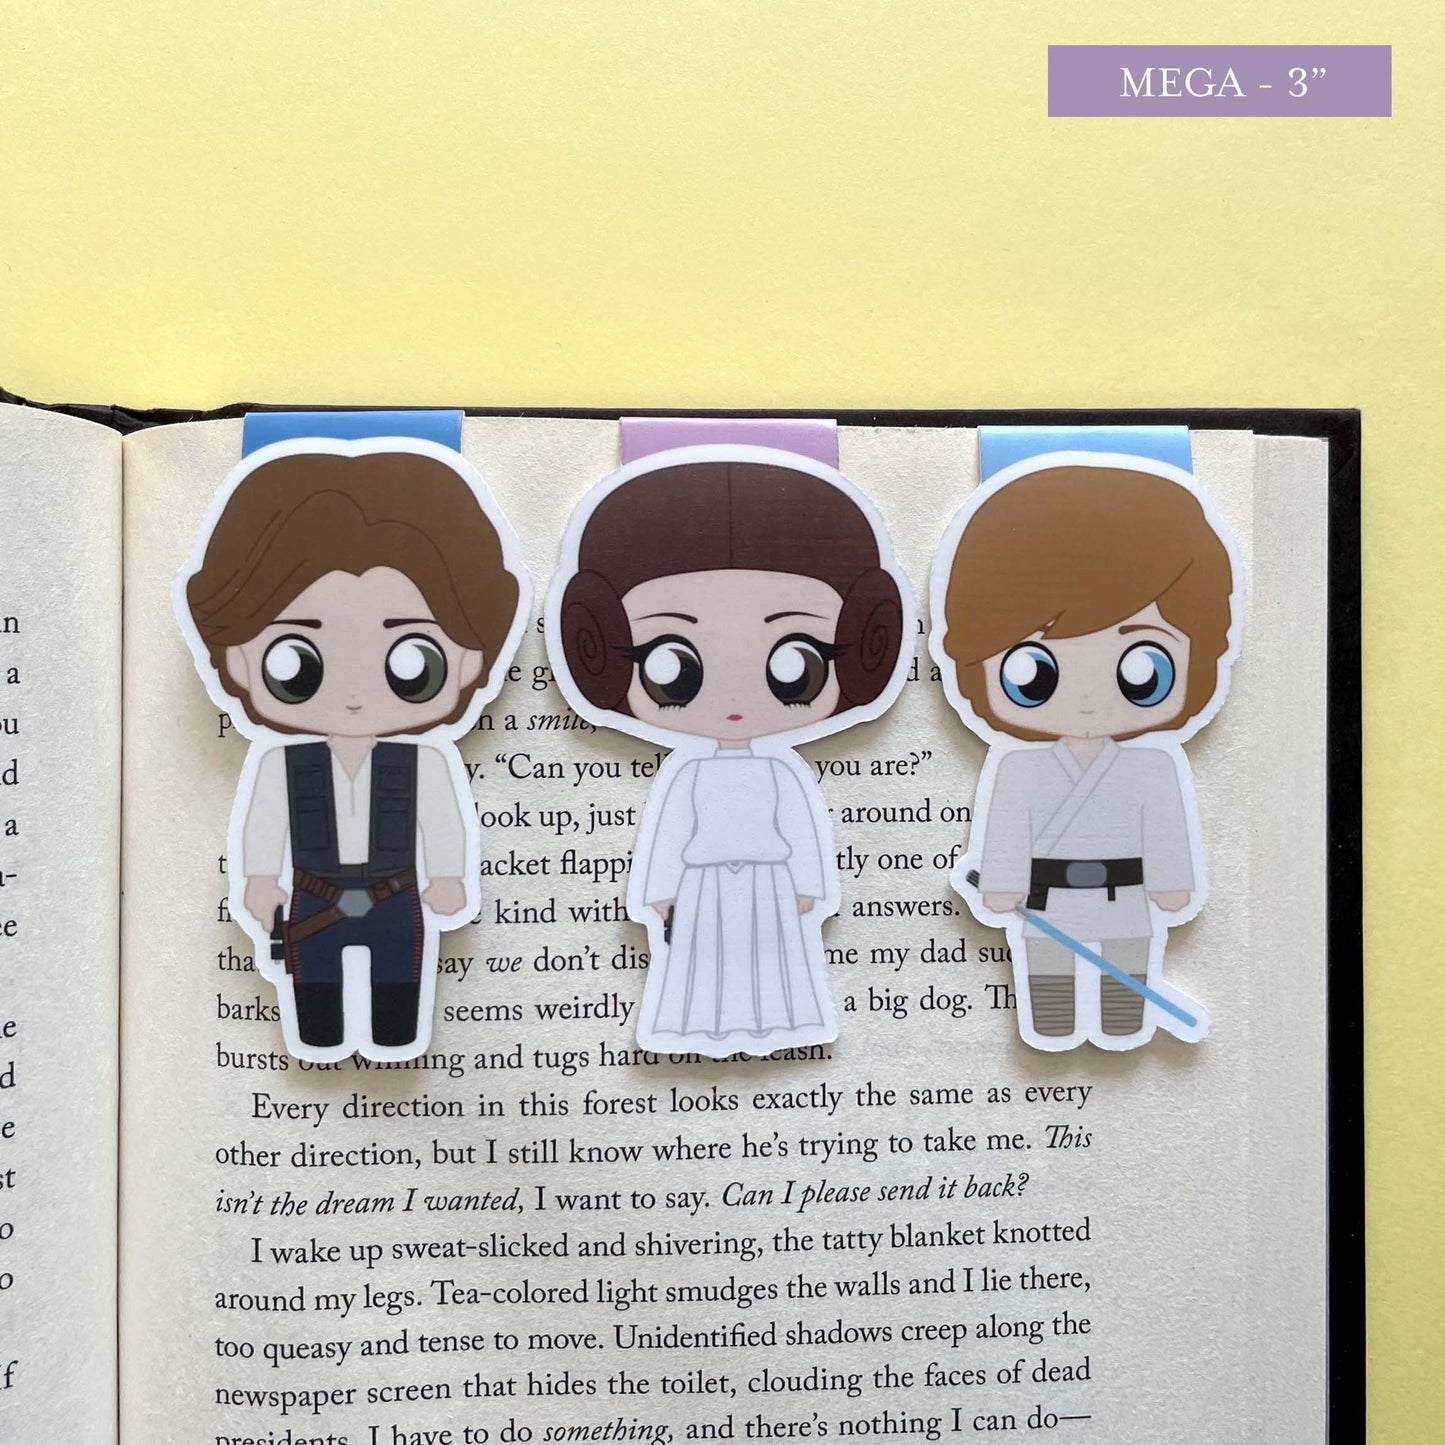 A New Hope Magnetic Bookmark Trio, featuring Han Solo, Princess Leia Organa, and Luke Skywalker